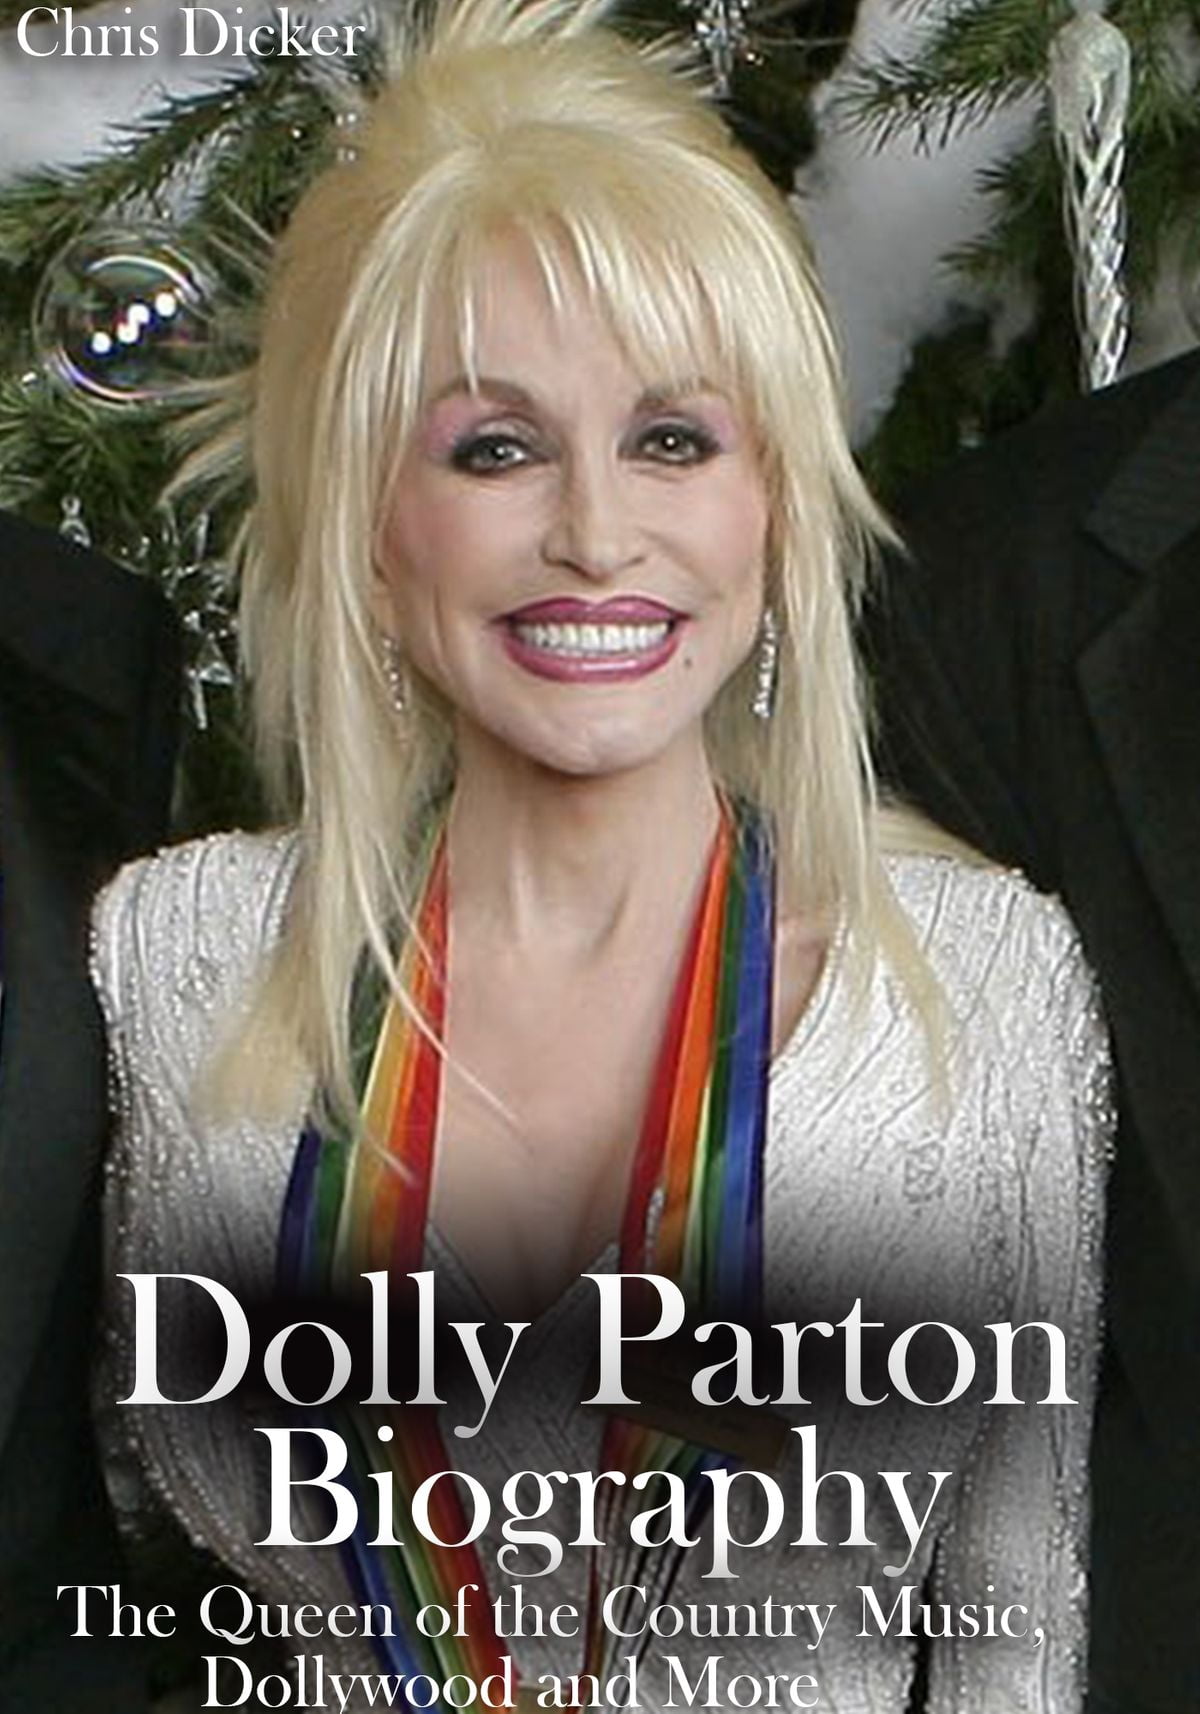 Dolly Parton Biography The Queen of the Country Music, Dollywood and